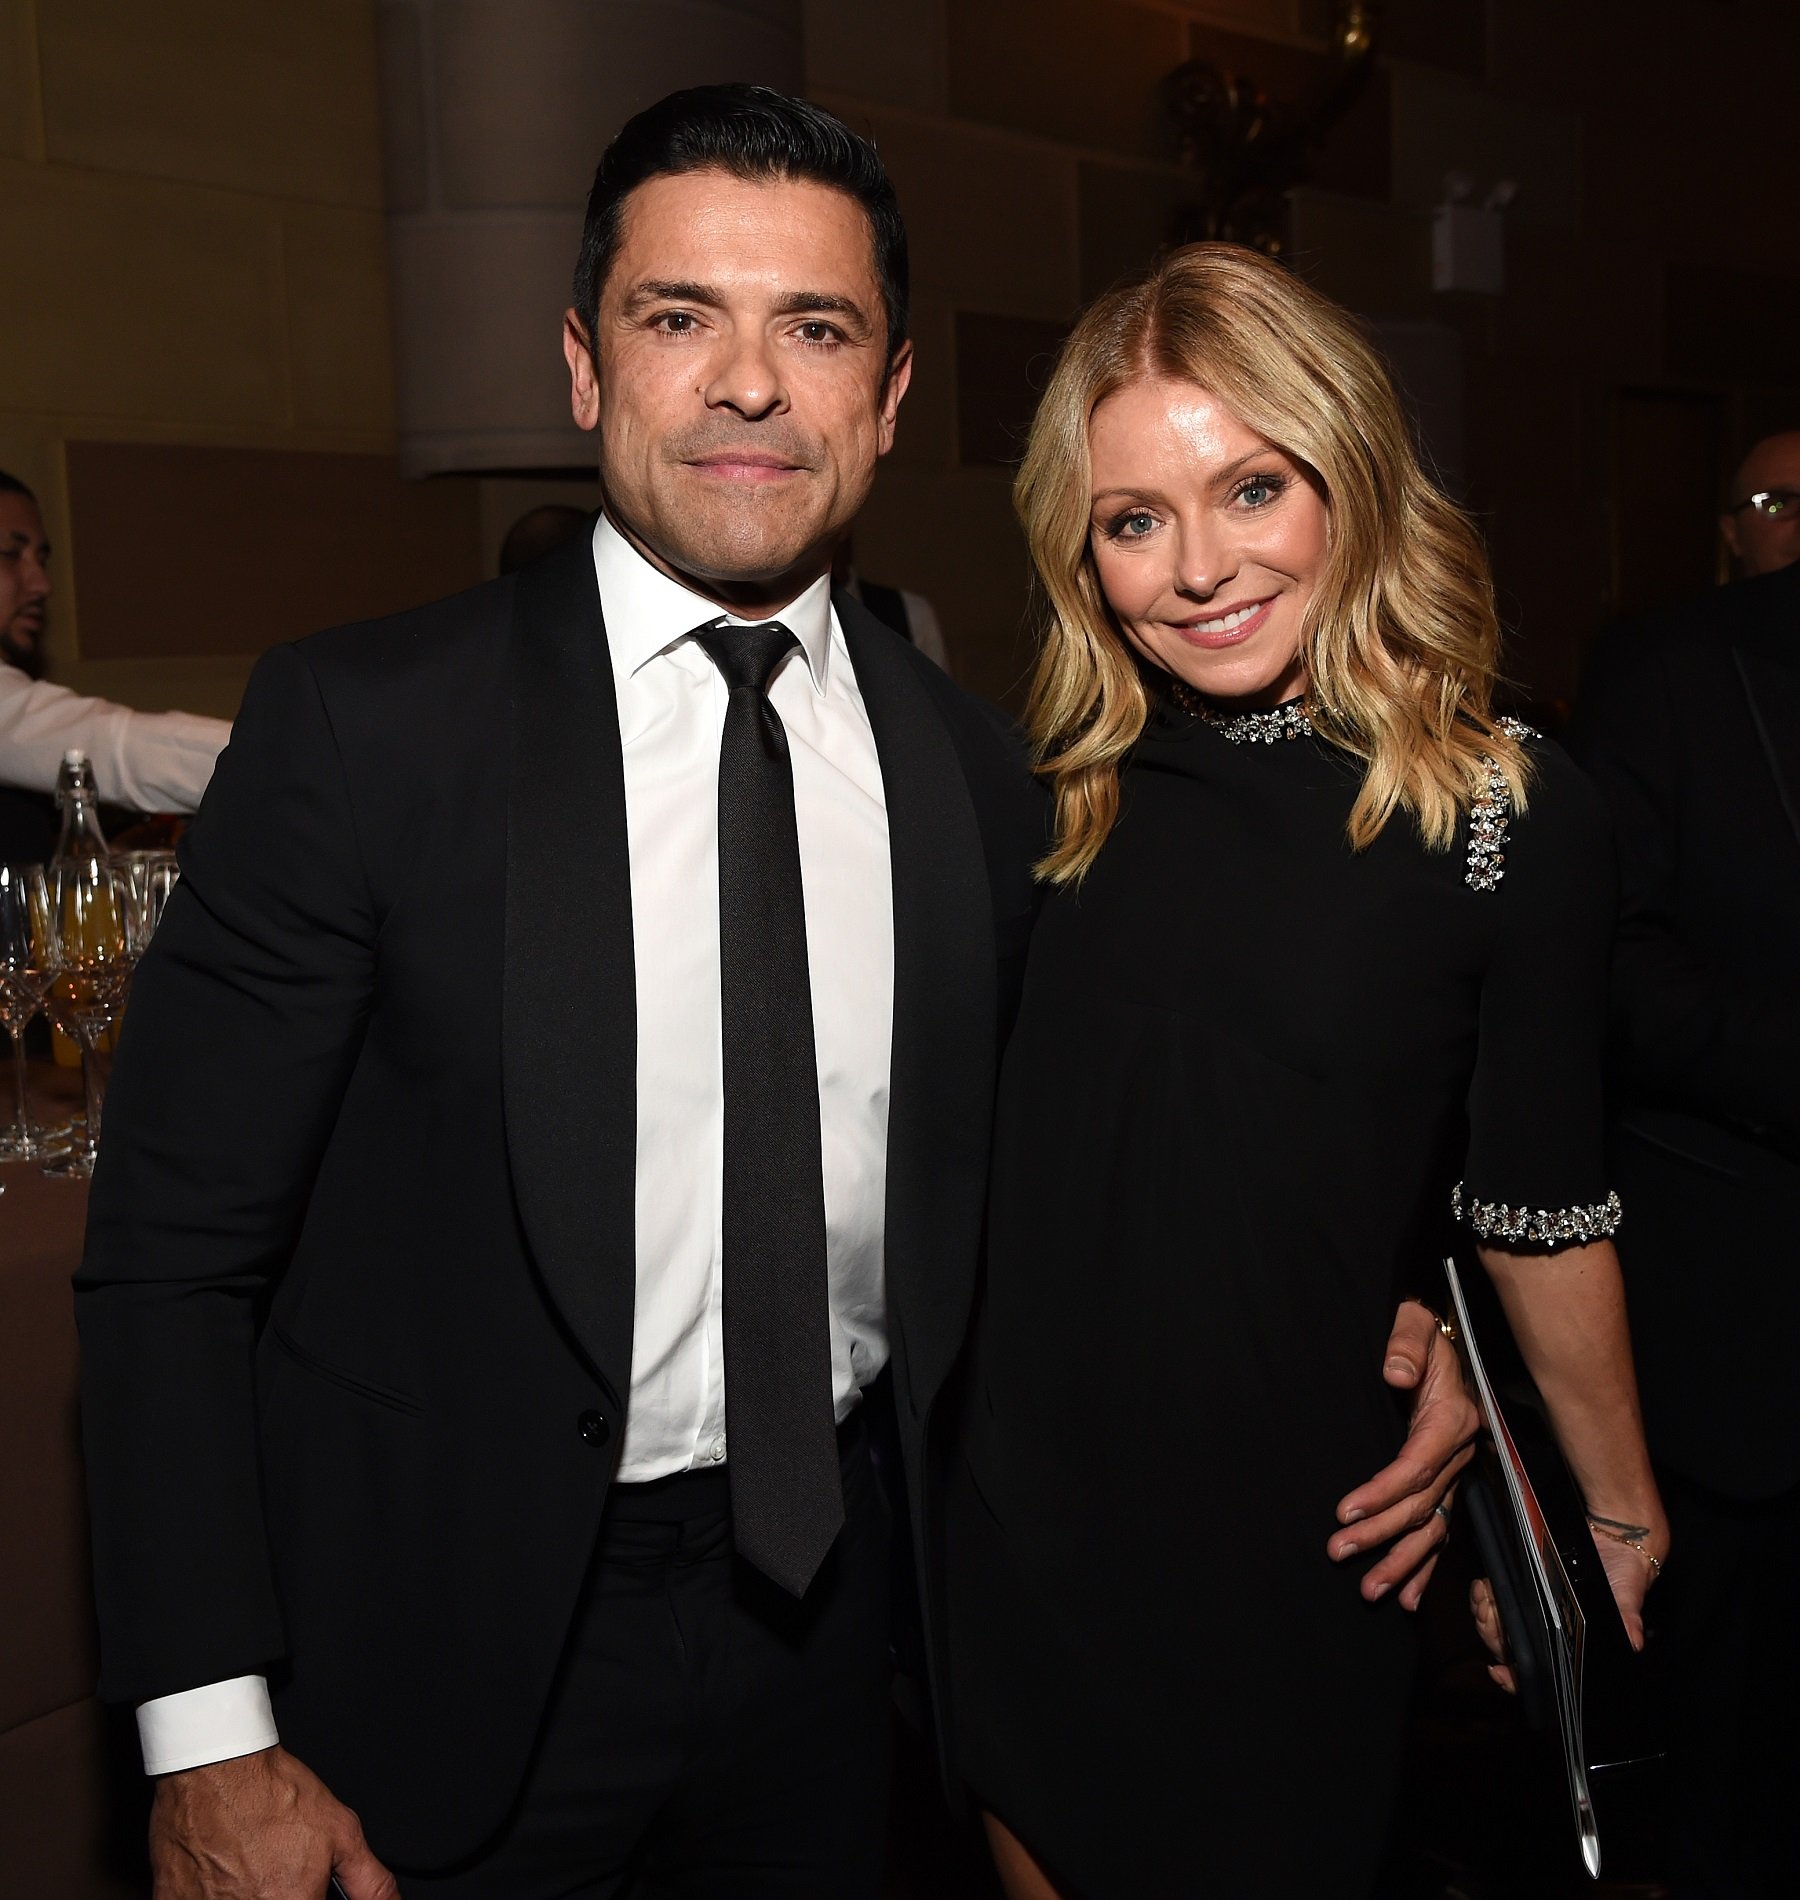 All My Children stars Kelly Ripa, in a black dress, and Mark Consuelos, in a tuxedo